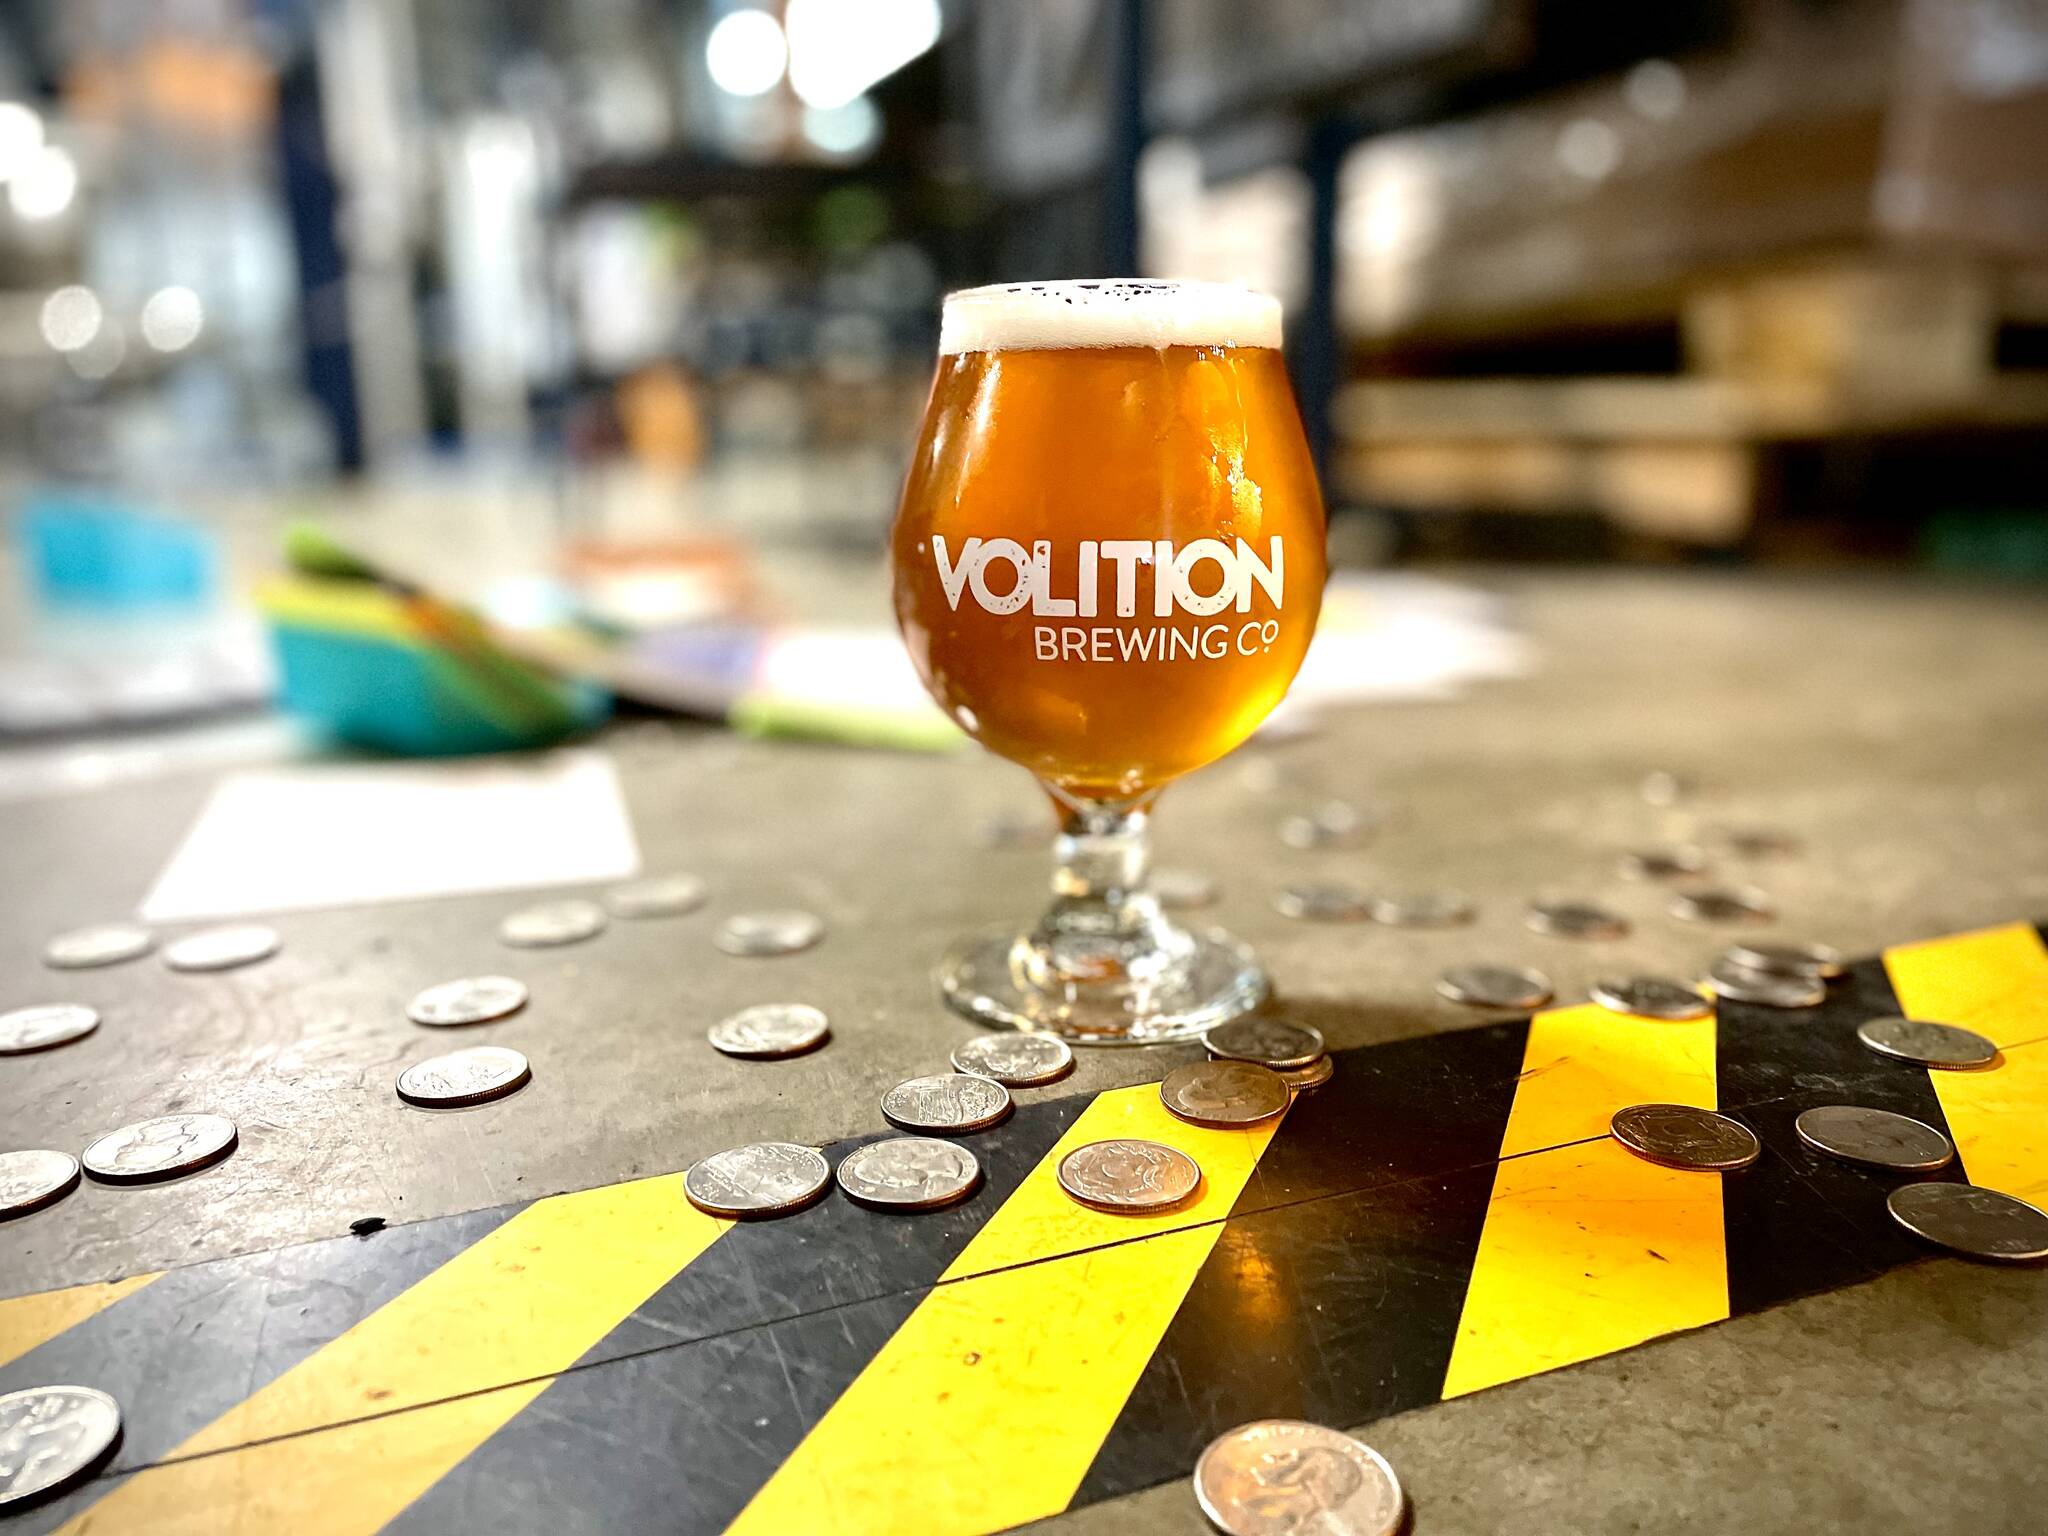 Jamie Haines took the opportunity to photograph the new double IPA at the scene of the theft of her North Bend brewery. (Photo courtesy of Jamie Haines)